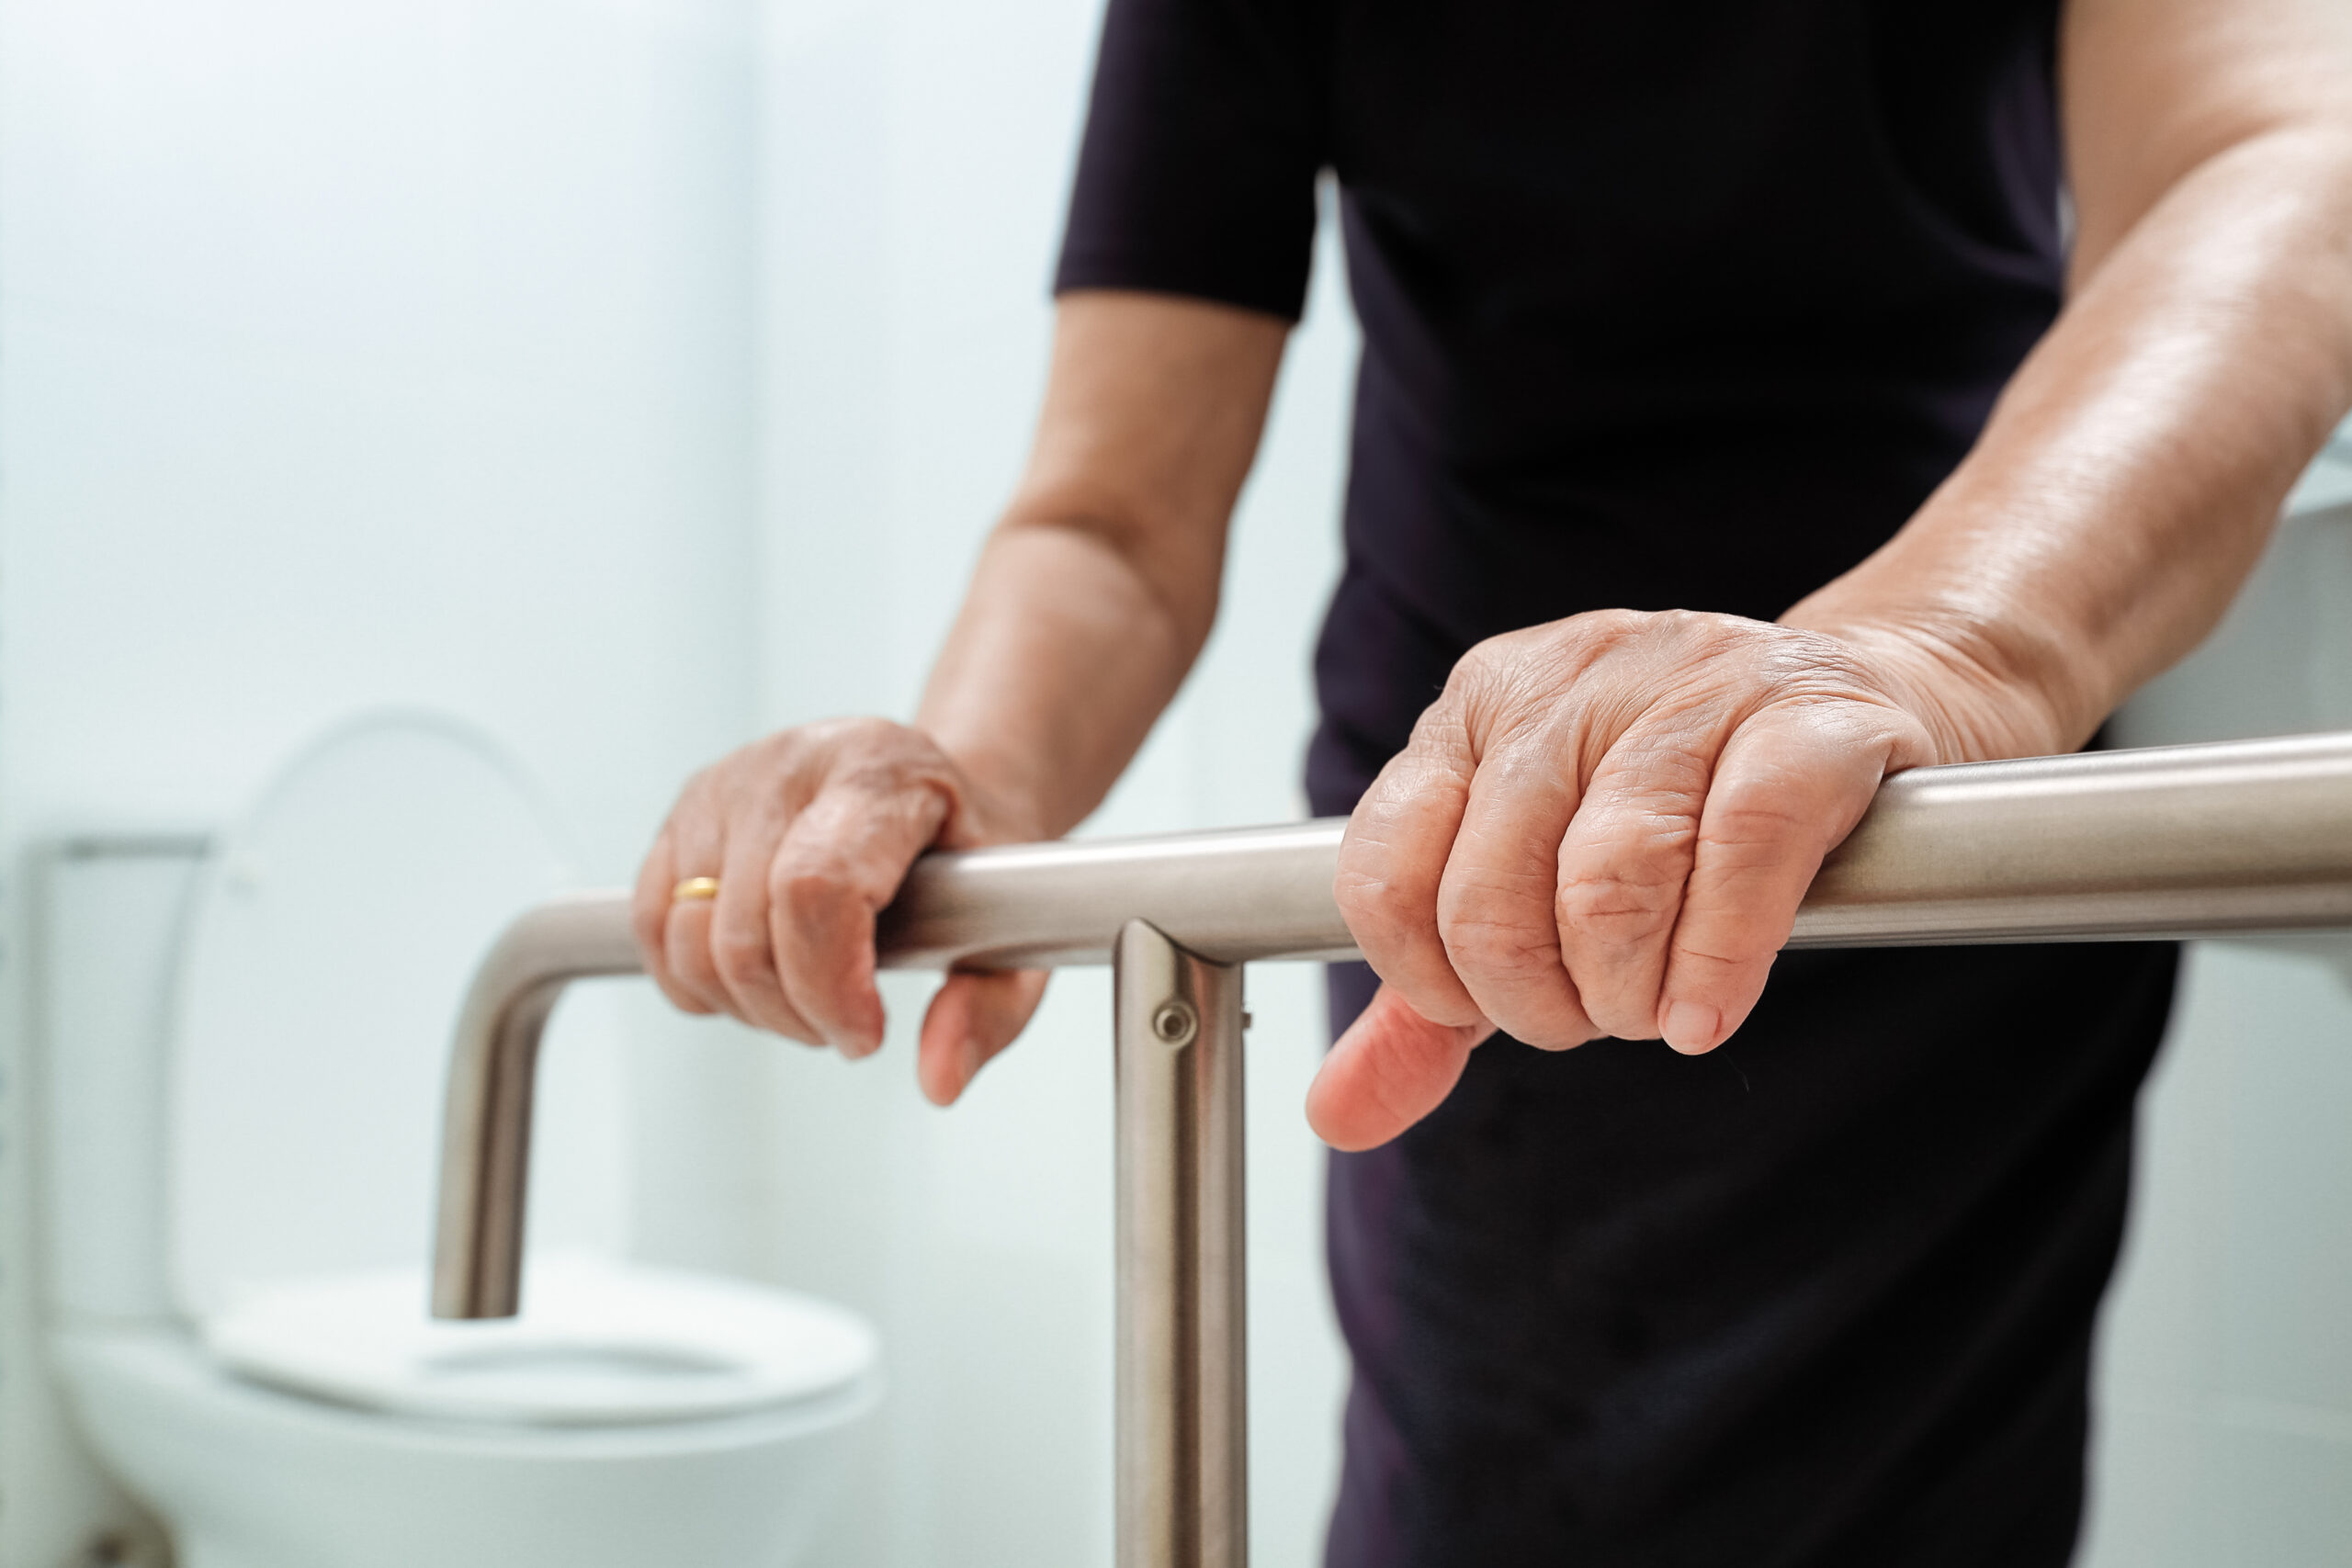 The Complete Guide To Bathroom Safety For The Elderly